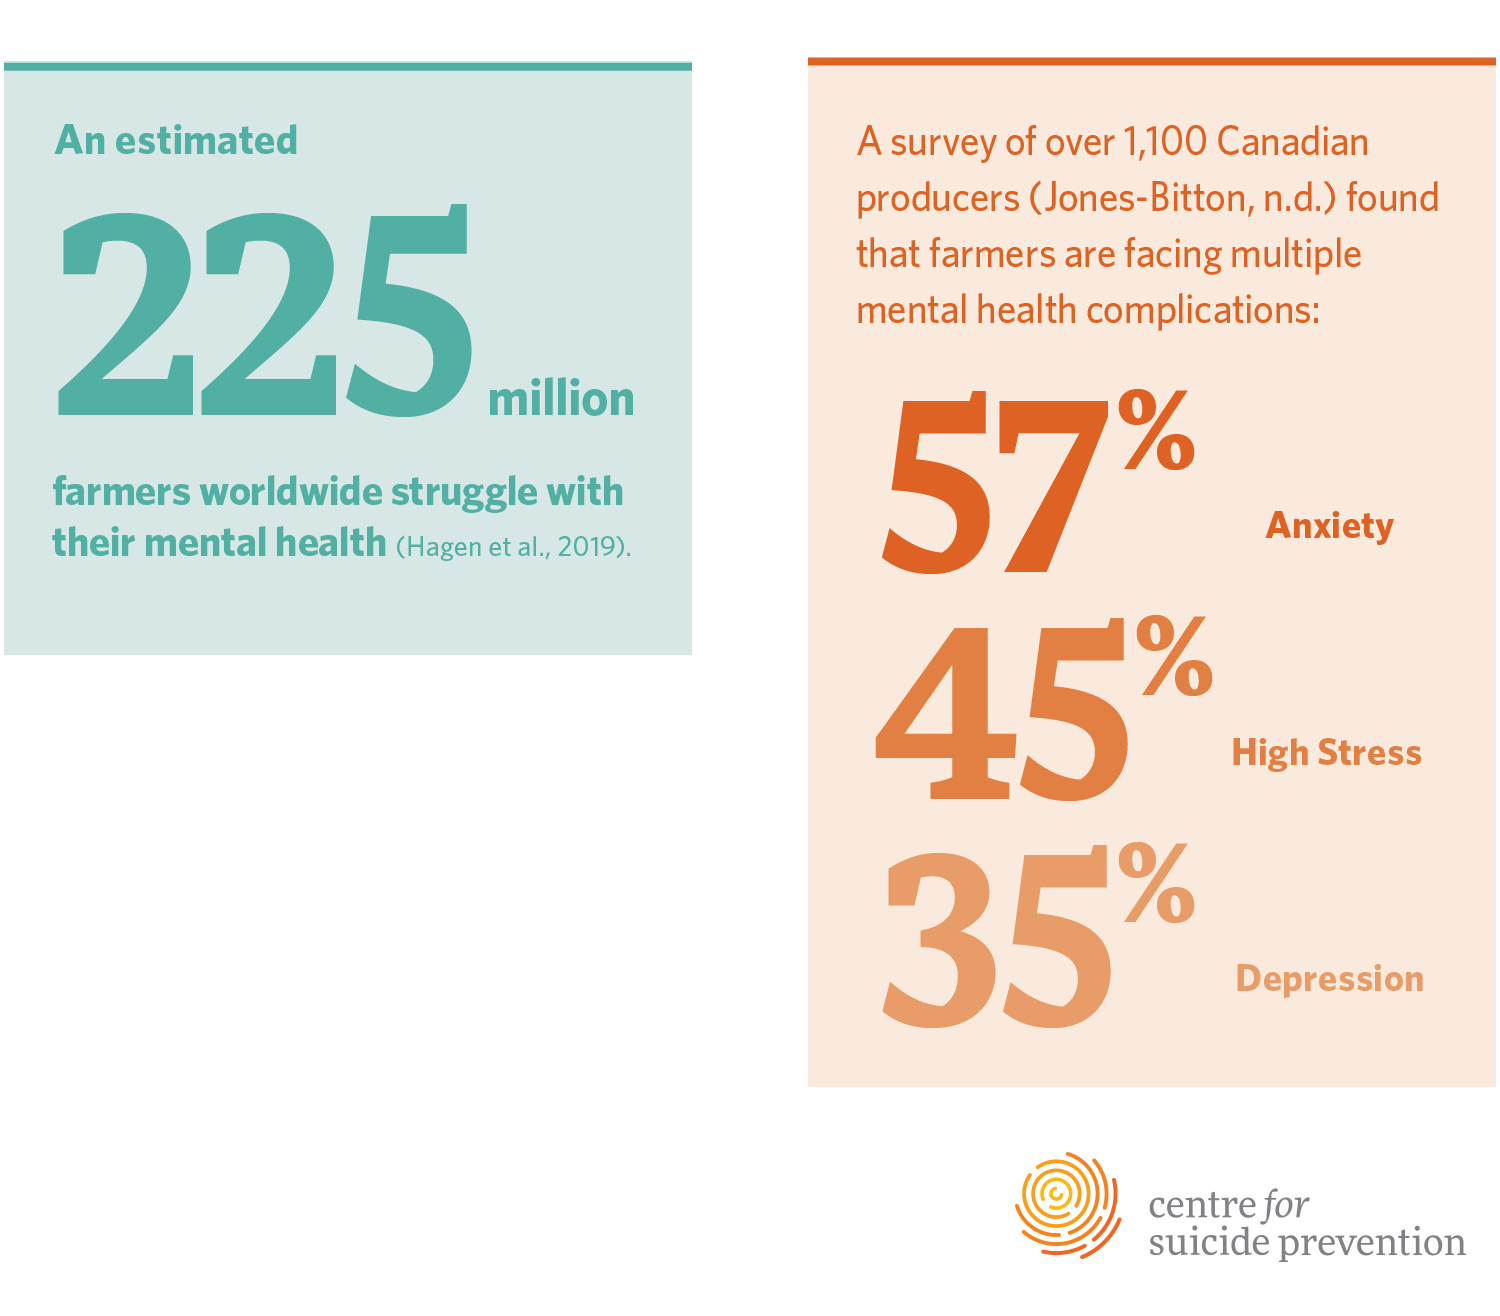 An estimated 225 million farmers worldwide may struggle with their mental health (Hagen et al., 2019). In Australia, farmers die by suicide at double the rate of the general population (Arnautovska et al., 2014). A survey of over 1,100 Canadian producers found that farmers are facing multiple mental health complications: 45% reported high stress, and many fell into classifications for anxiety (57%) and depression (35%) (Jones-Bitton, n.d.).